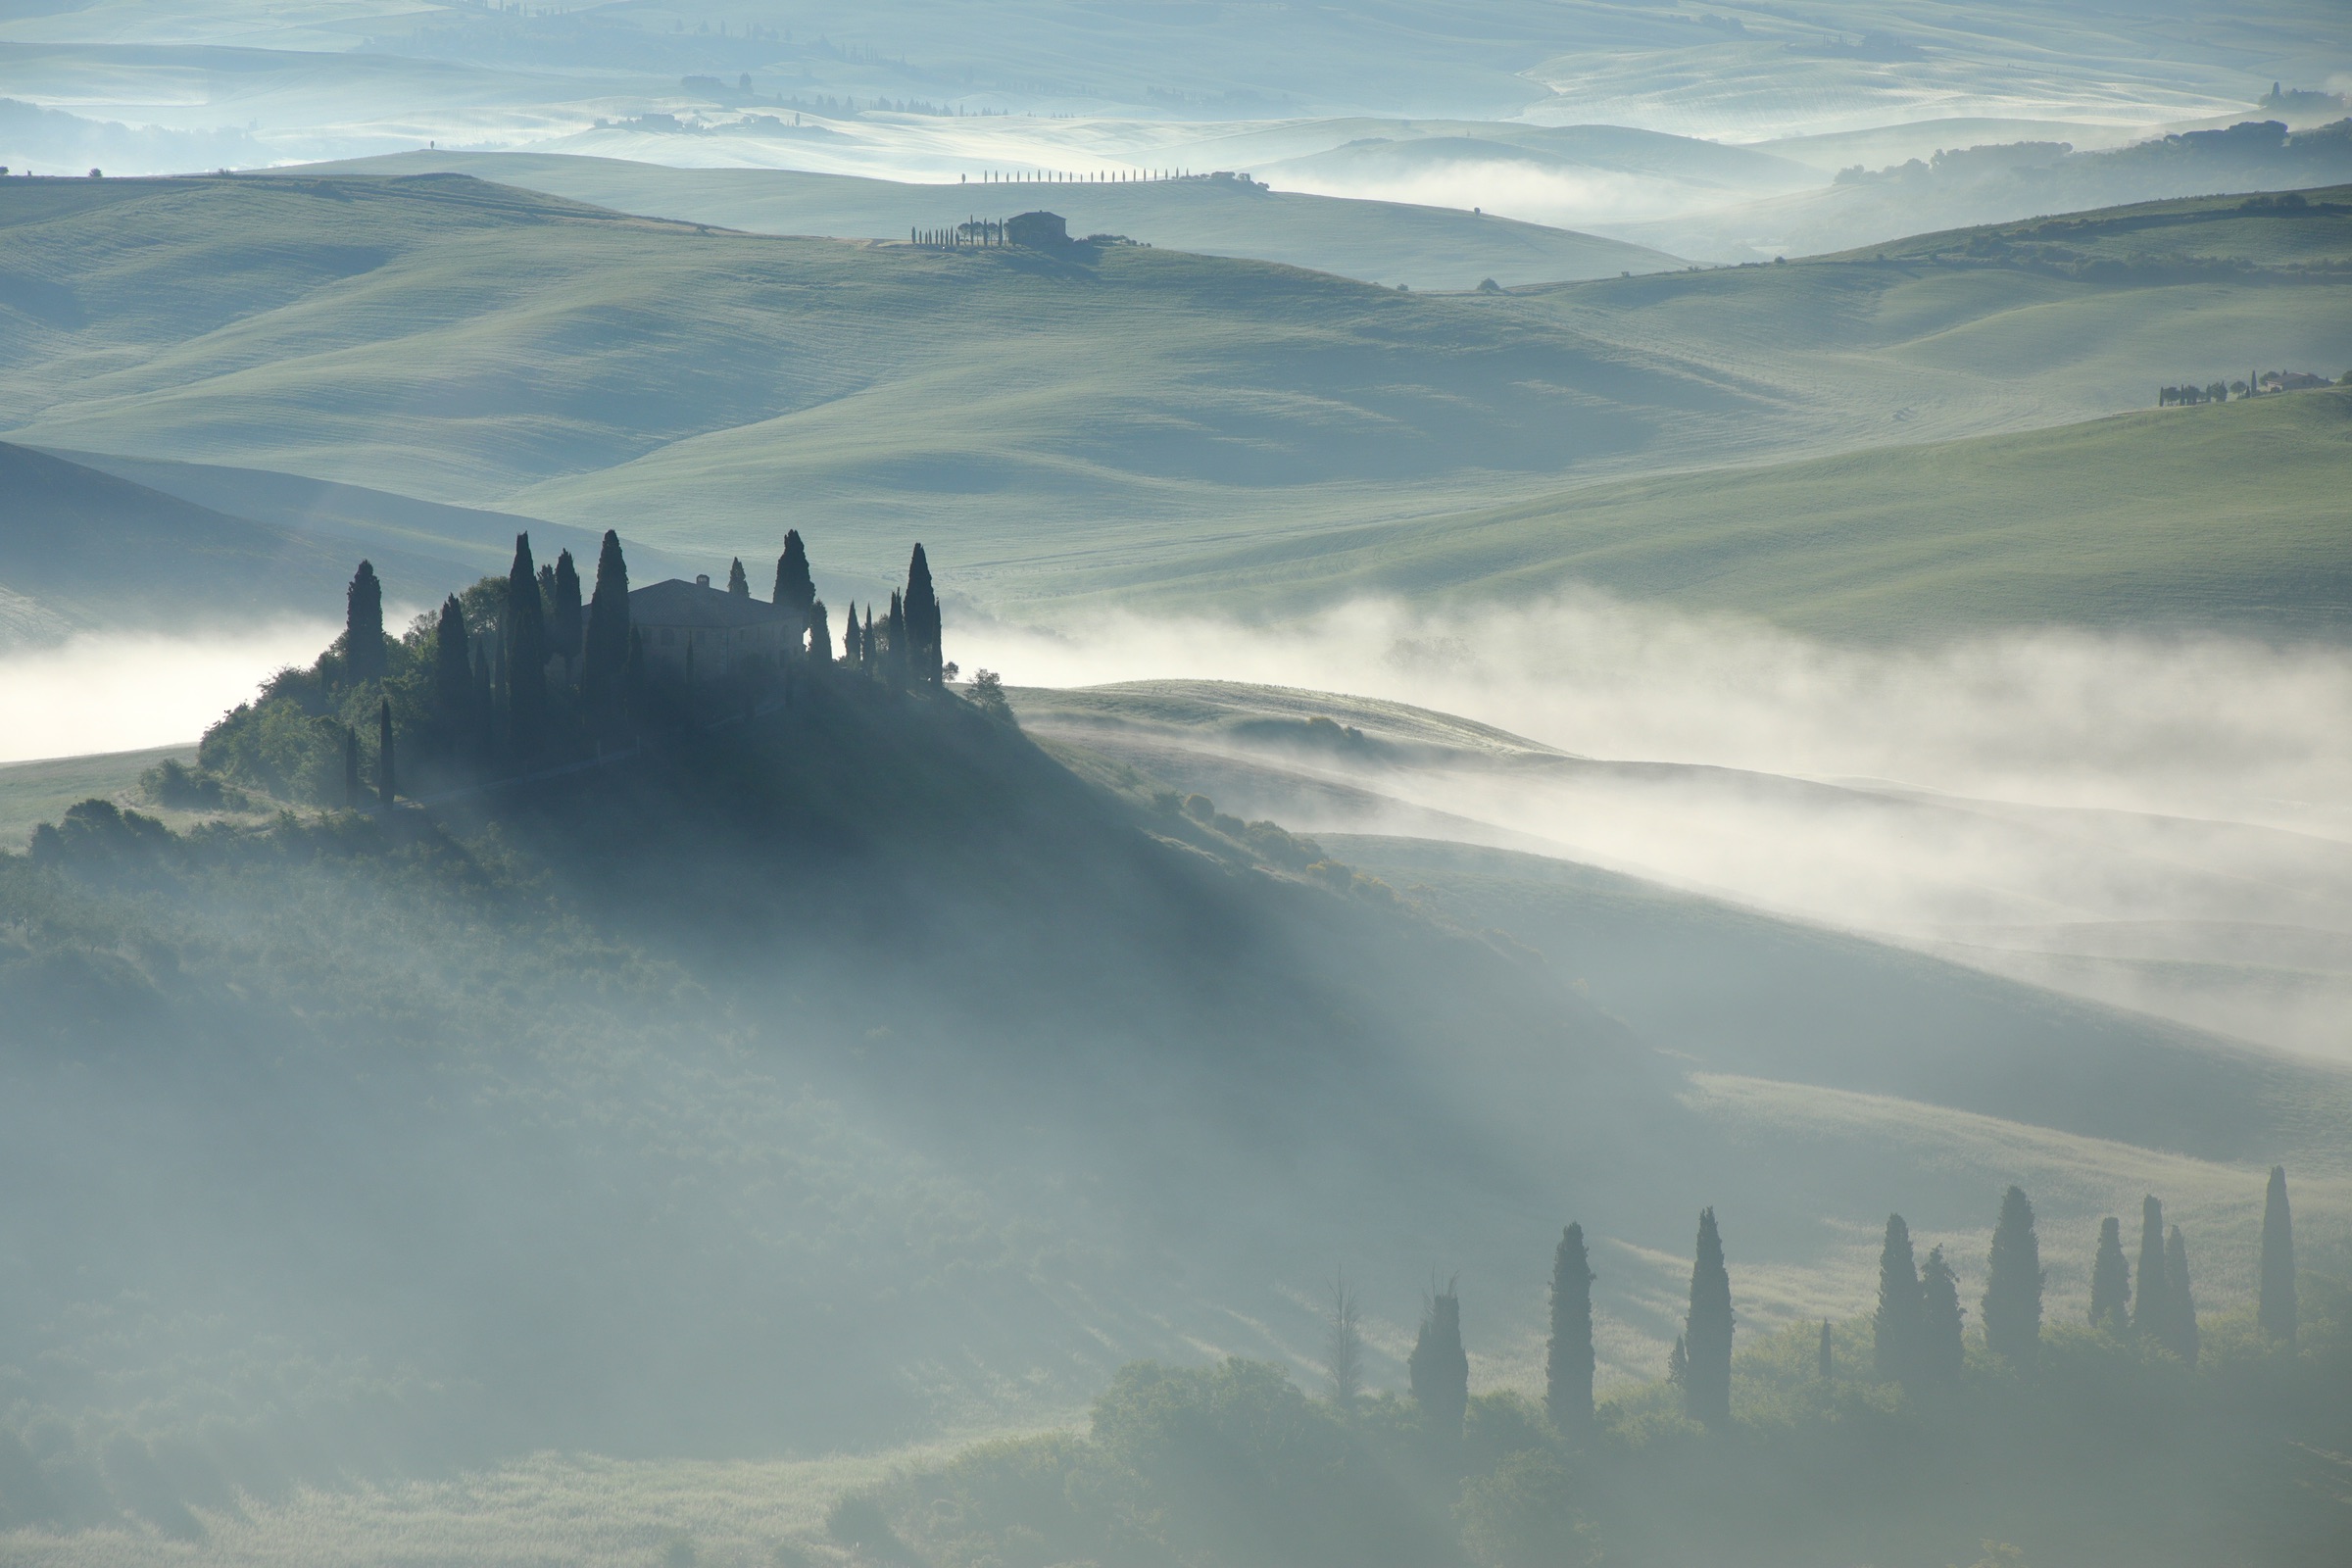 Tuscany Italy photo tour with Don Mammoser